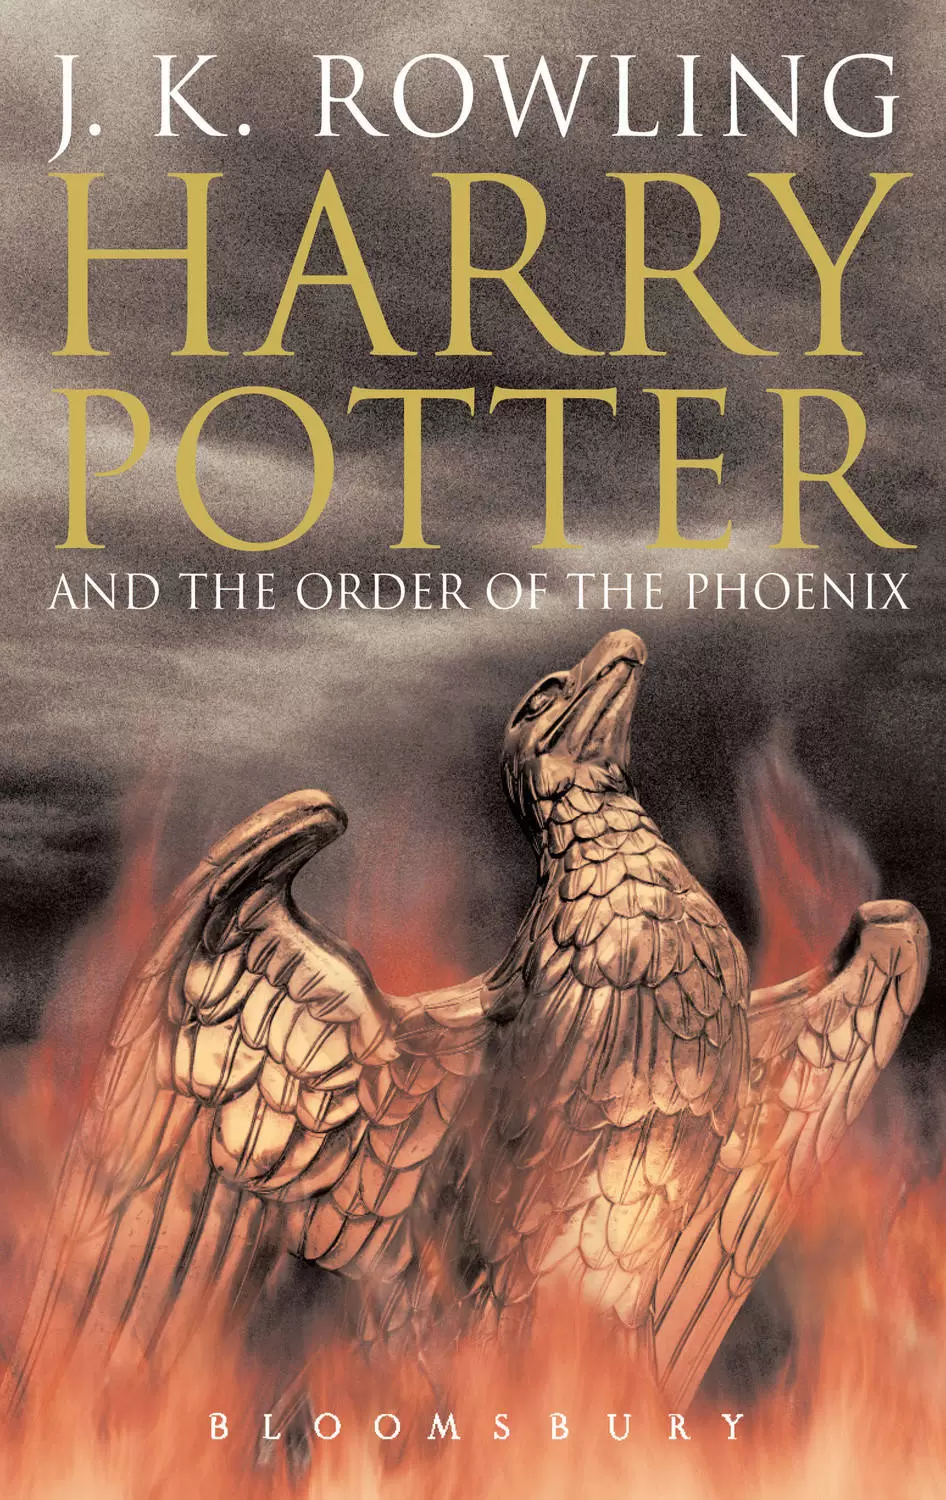 Livres Harry Potter et Animaux Fantastiques - Harry Potter and the Order of the Phoenix - Adult Edition